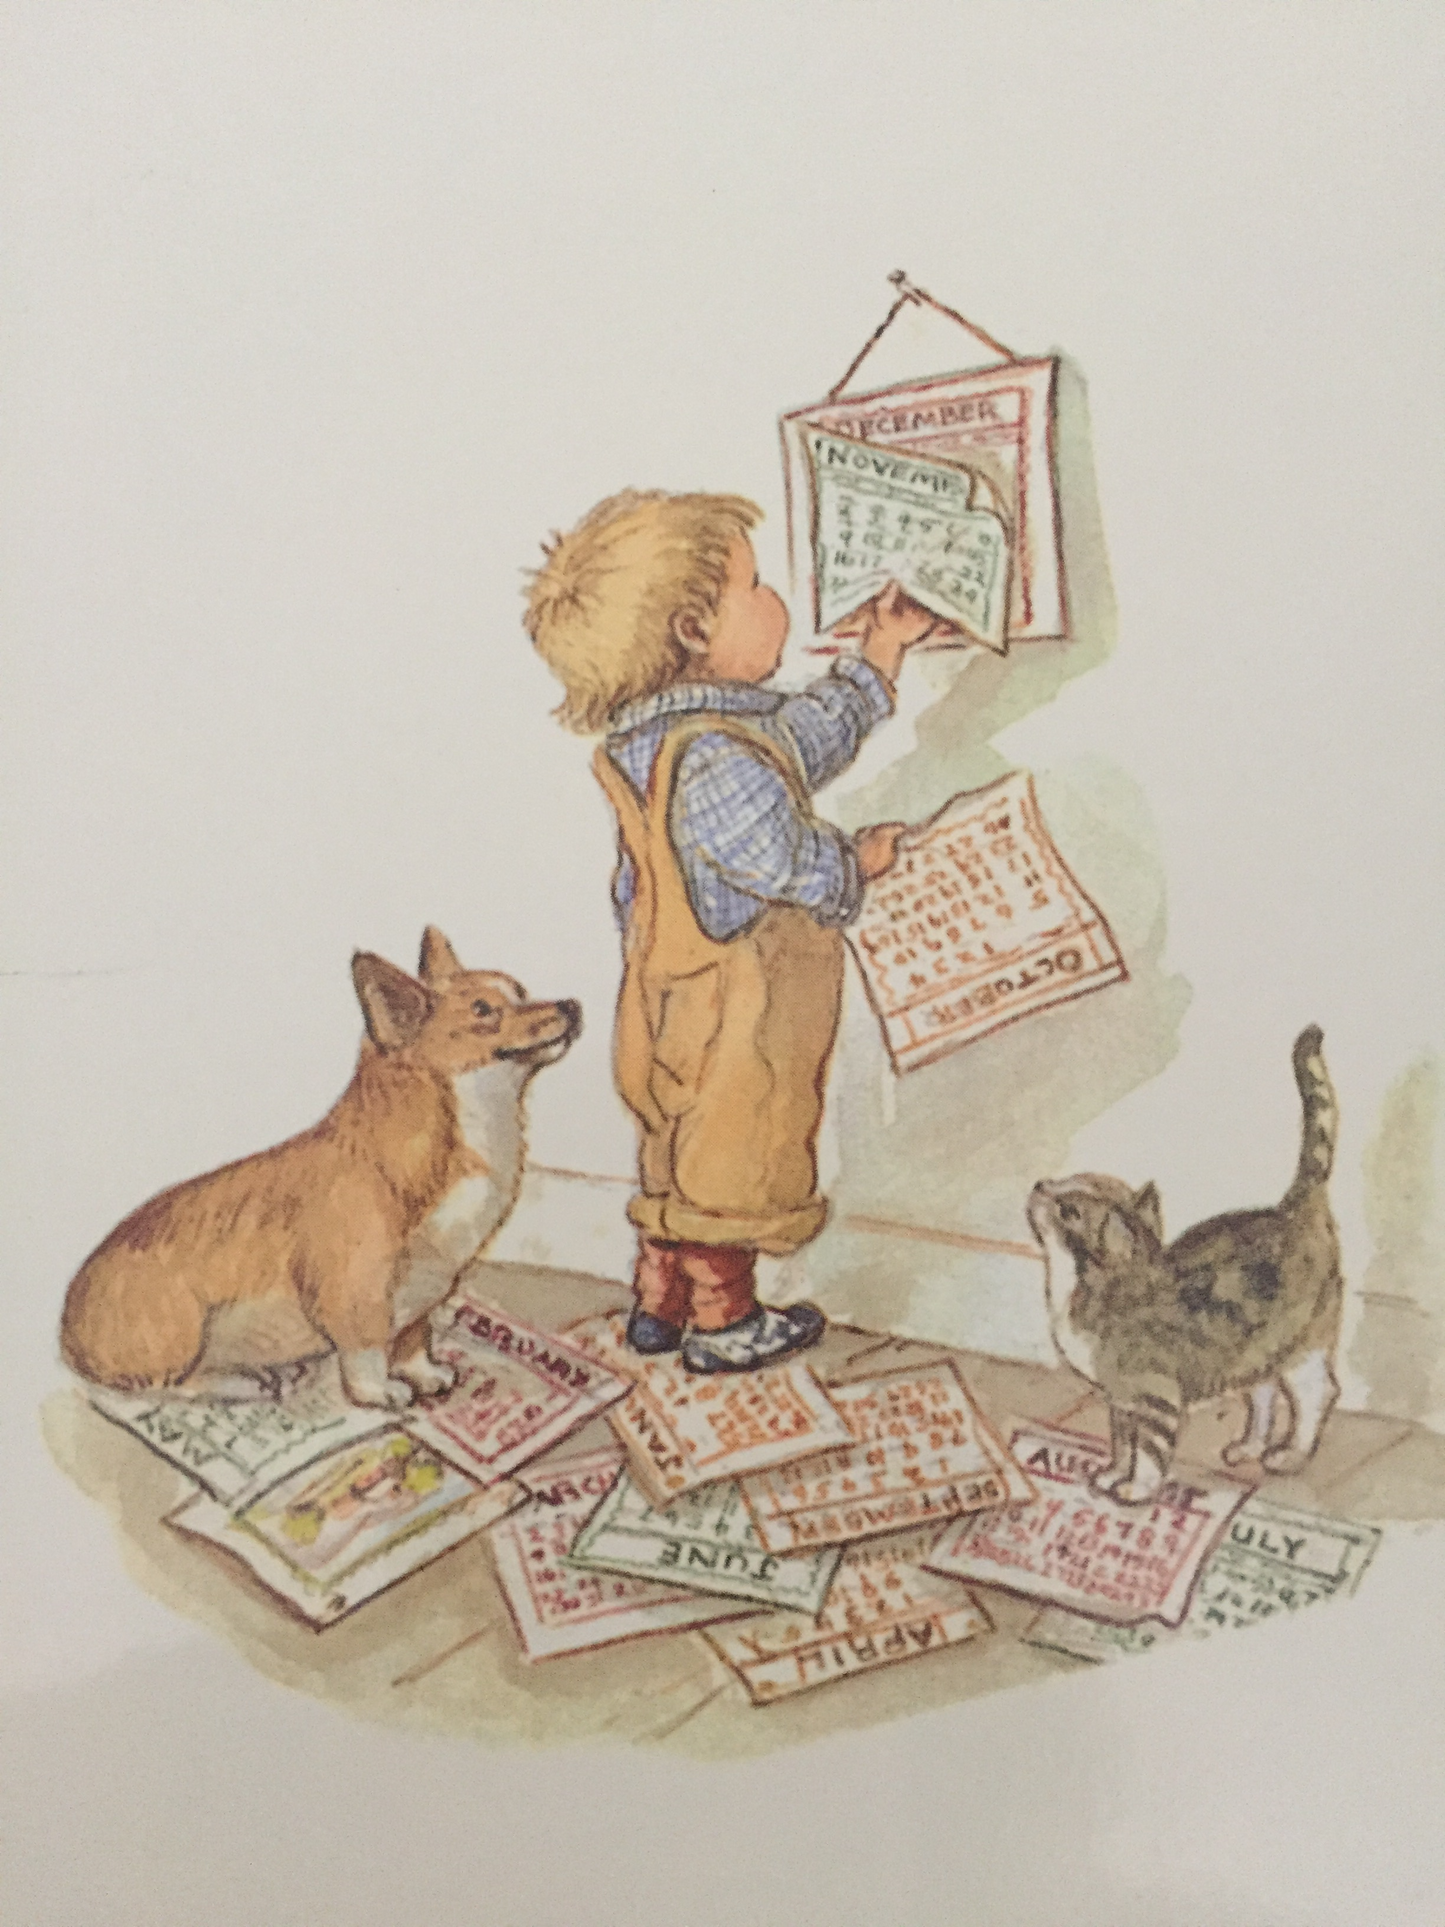 Children's Picture Book - Tasha Tudor's A TIME TO KEEP